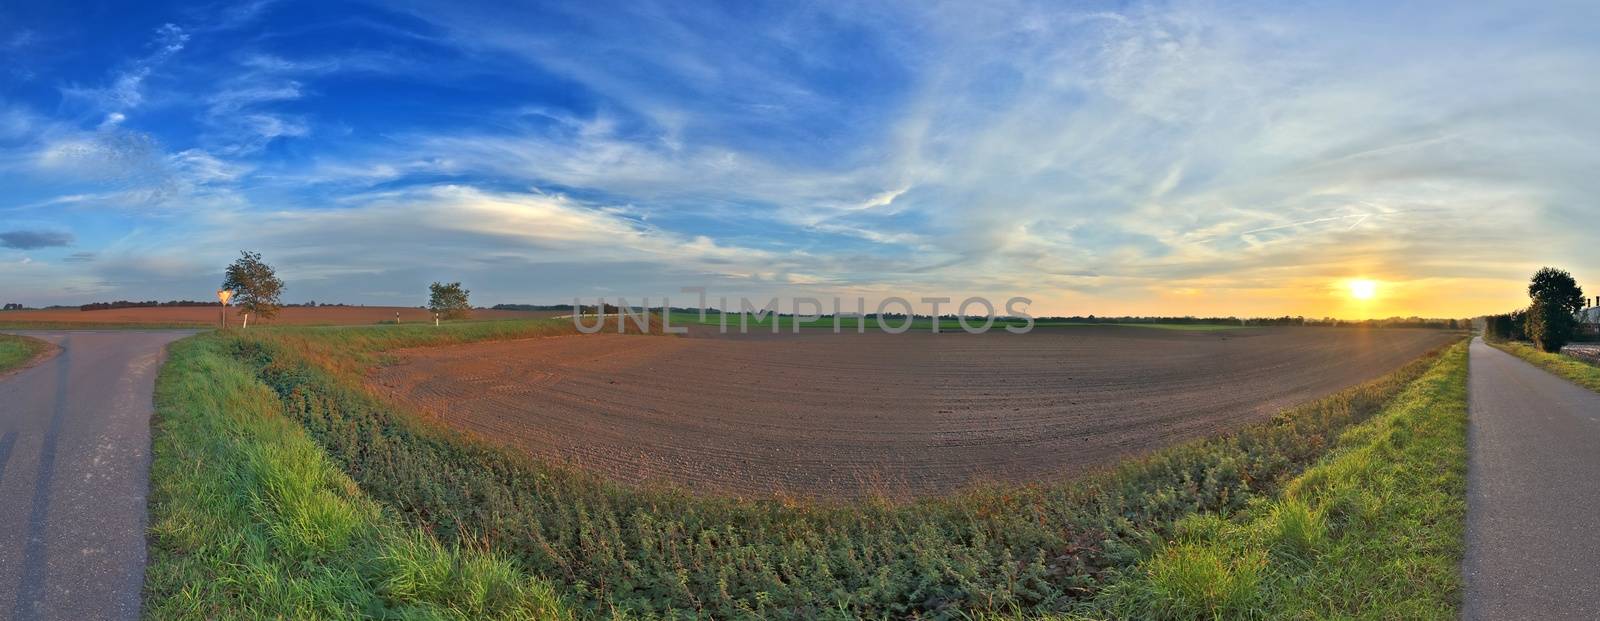 Beautiful high resolution panorama of a northern european countr by MP_foto71